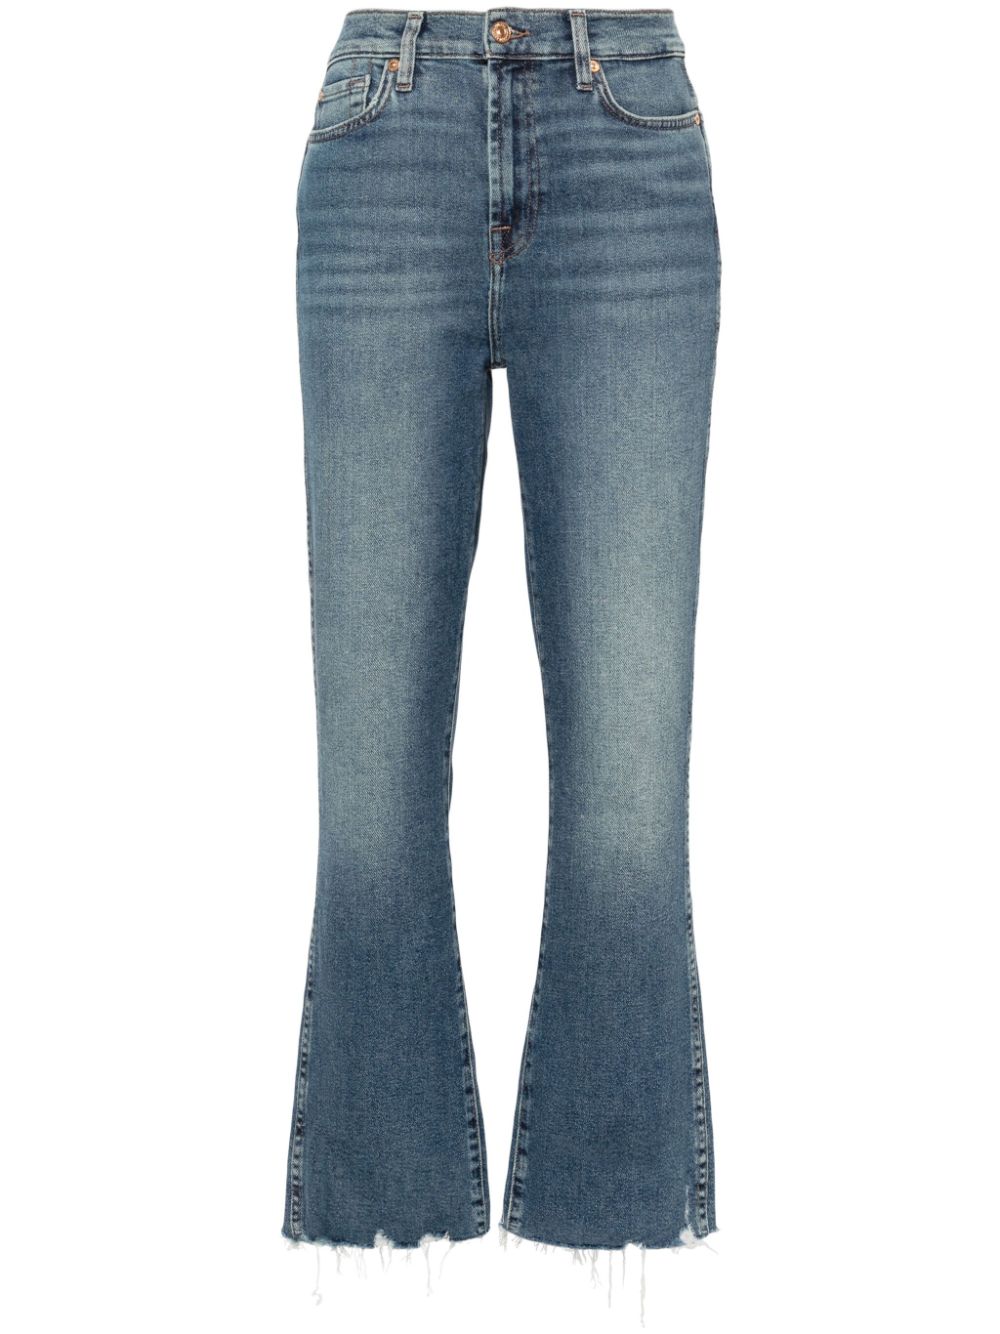 7 For All Mankind high-rise cropped jeans - Blue von 7 For All Mankind